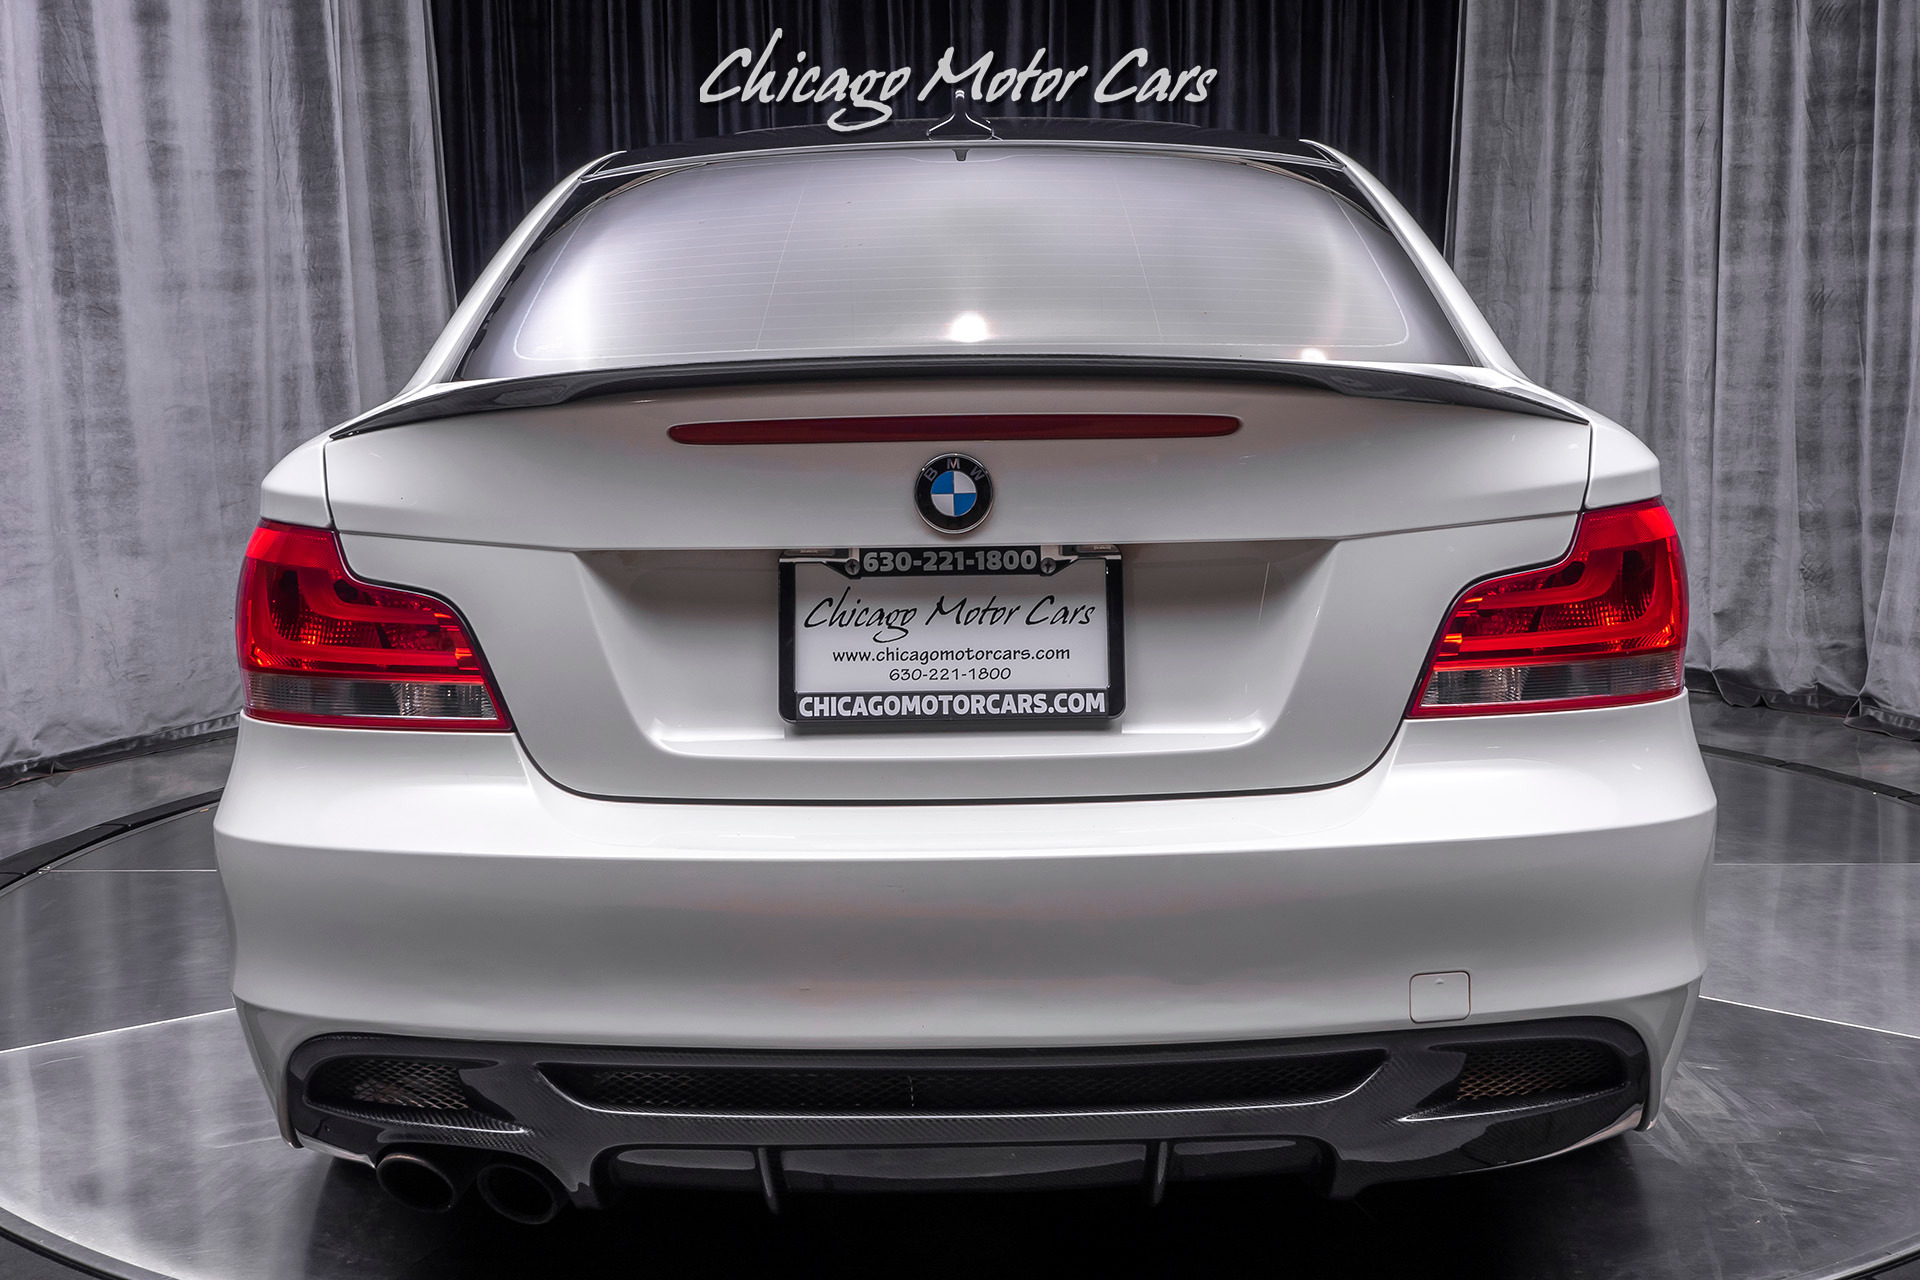 Used-2012-BMW-135i-Coupe-MSRP-45K-PREMIUM-PACKAGE-Navigation-300-HP